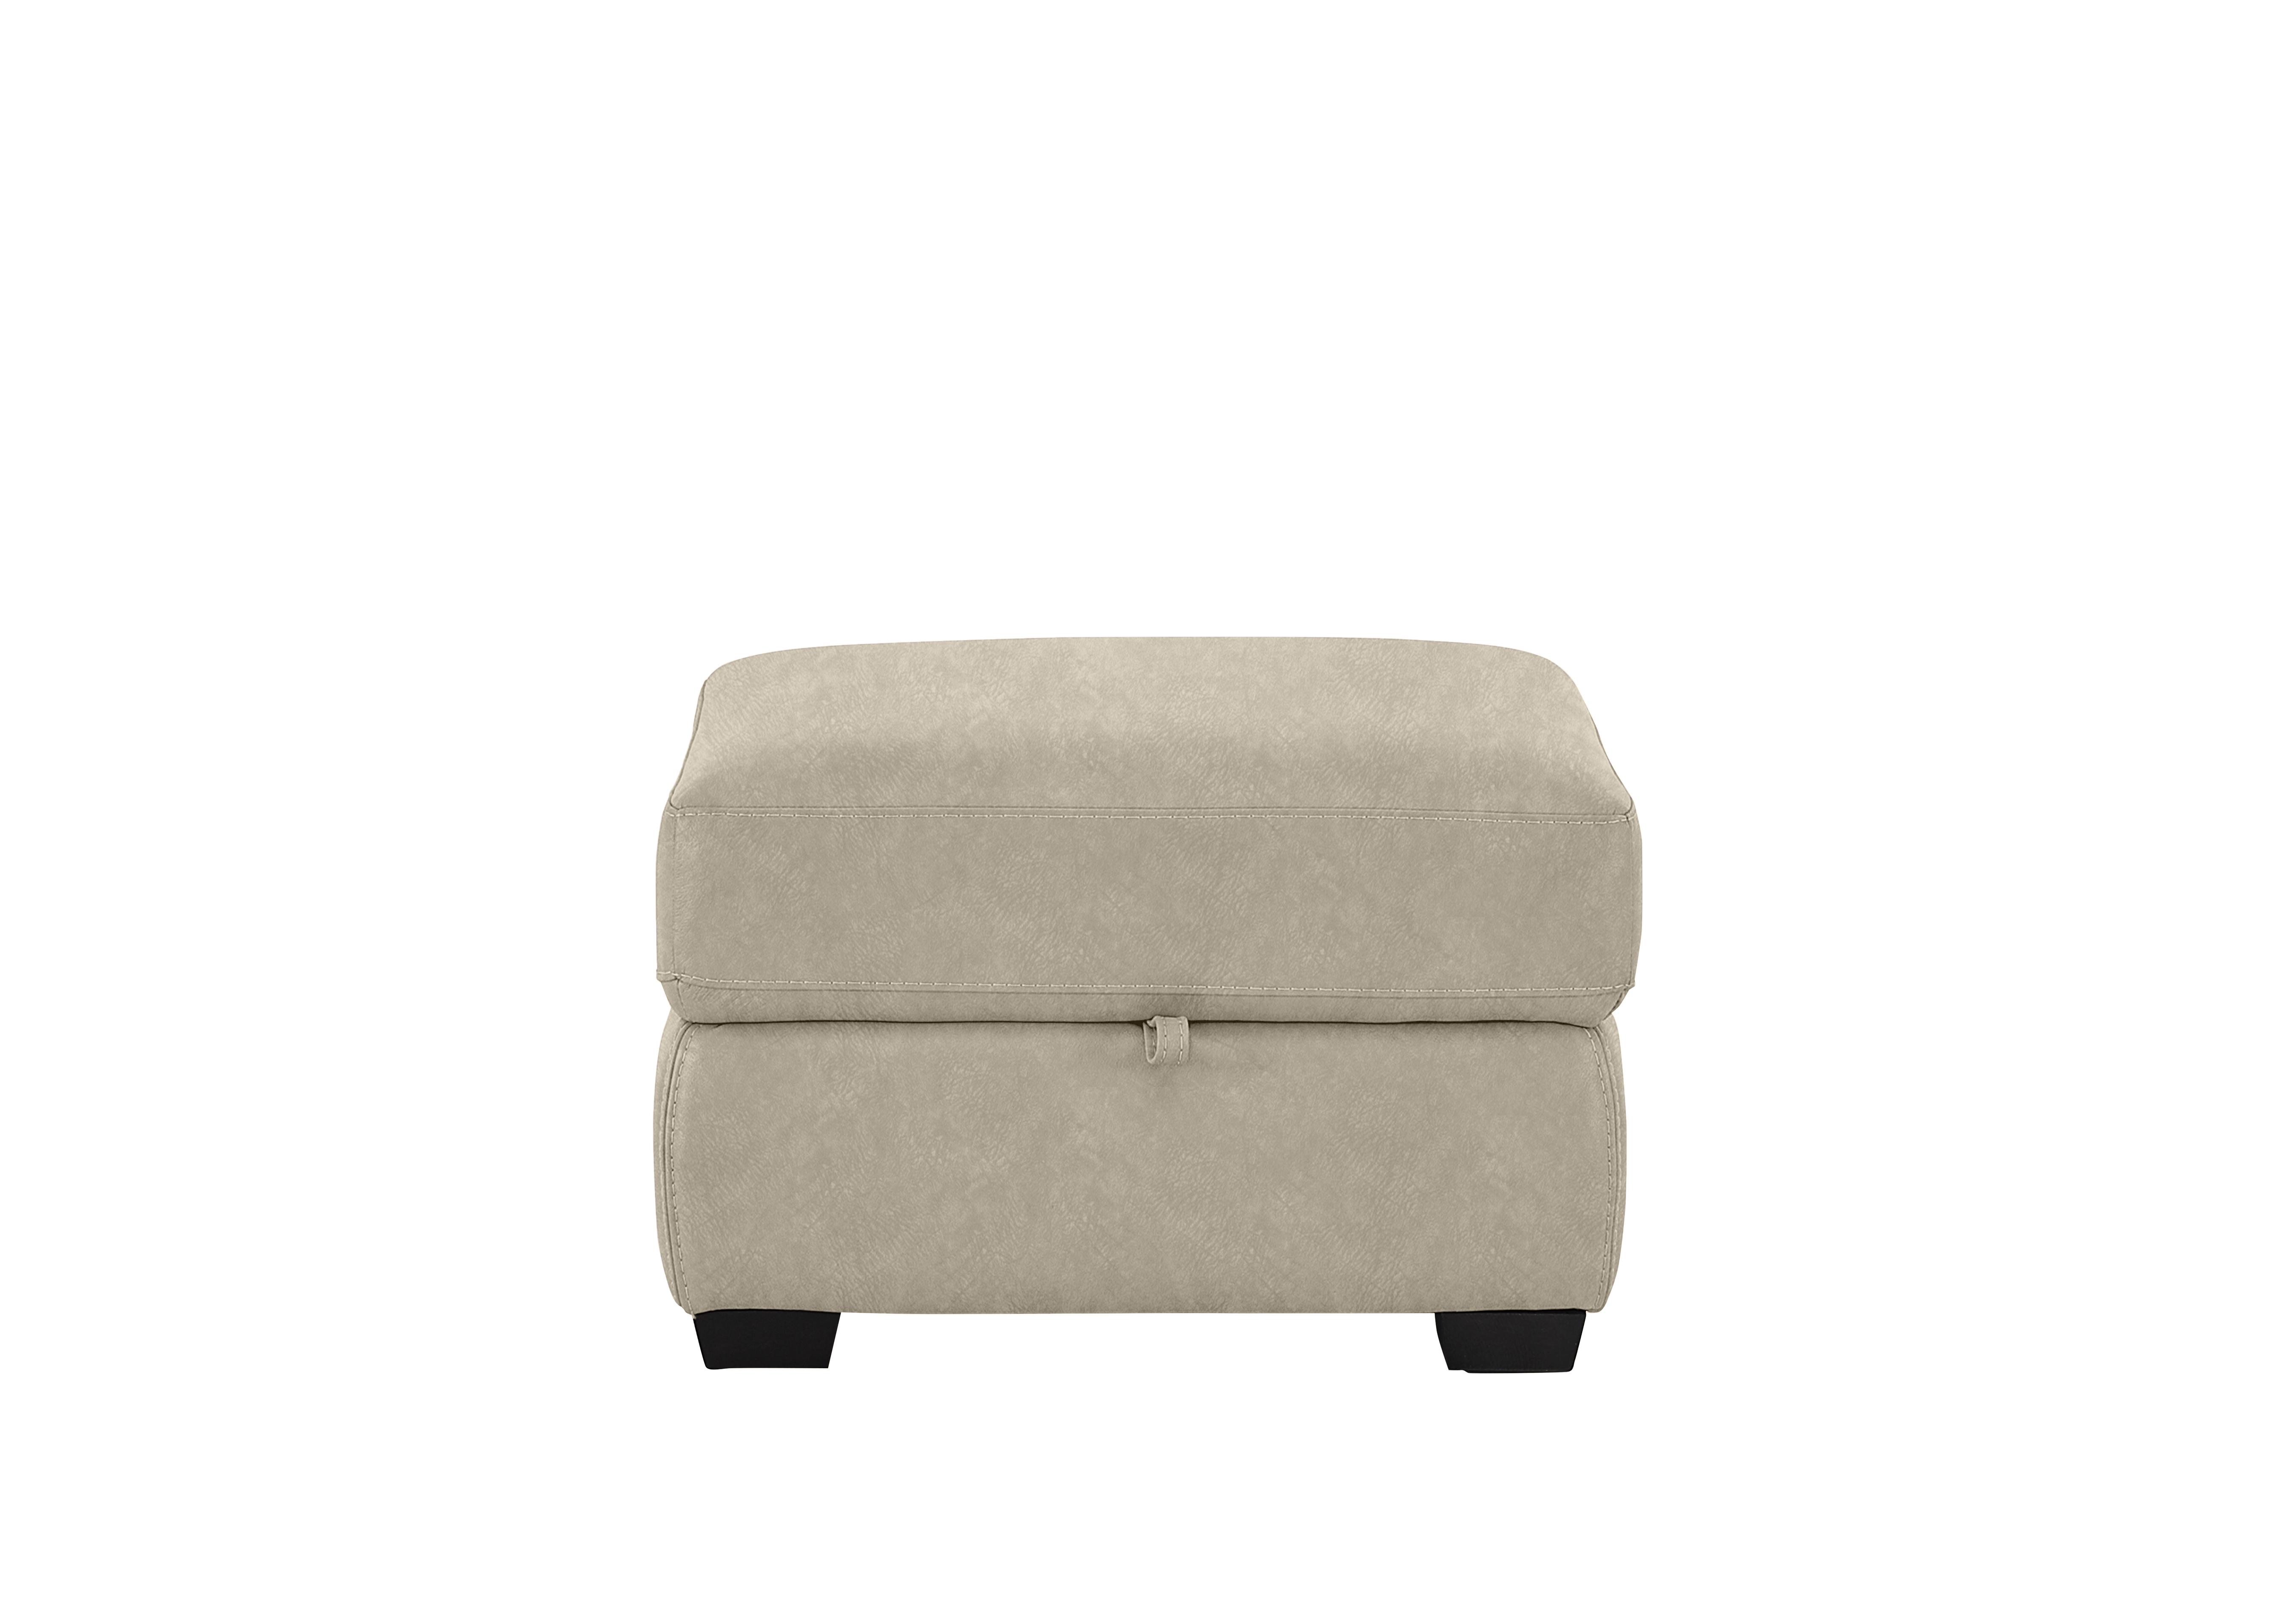 Compact Collection Petit Fabric Storage Footstool in Bfa-Bnn-R26 Fv2 Cream on Furniture Village